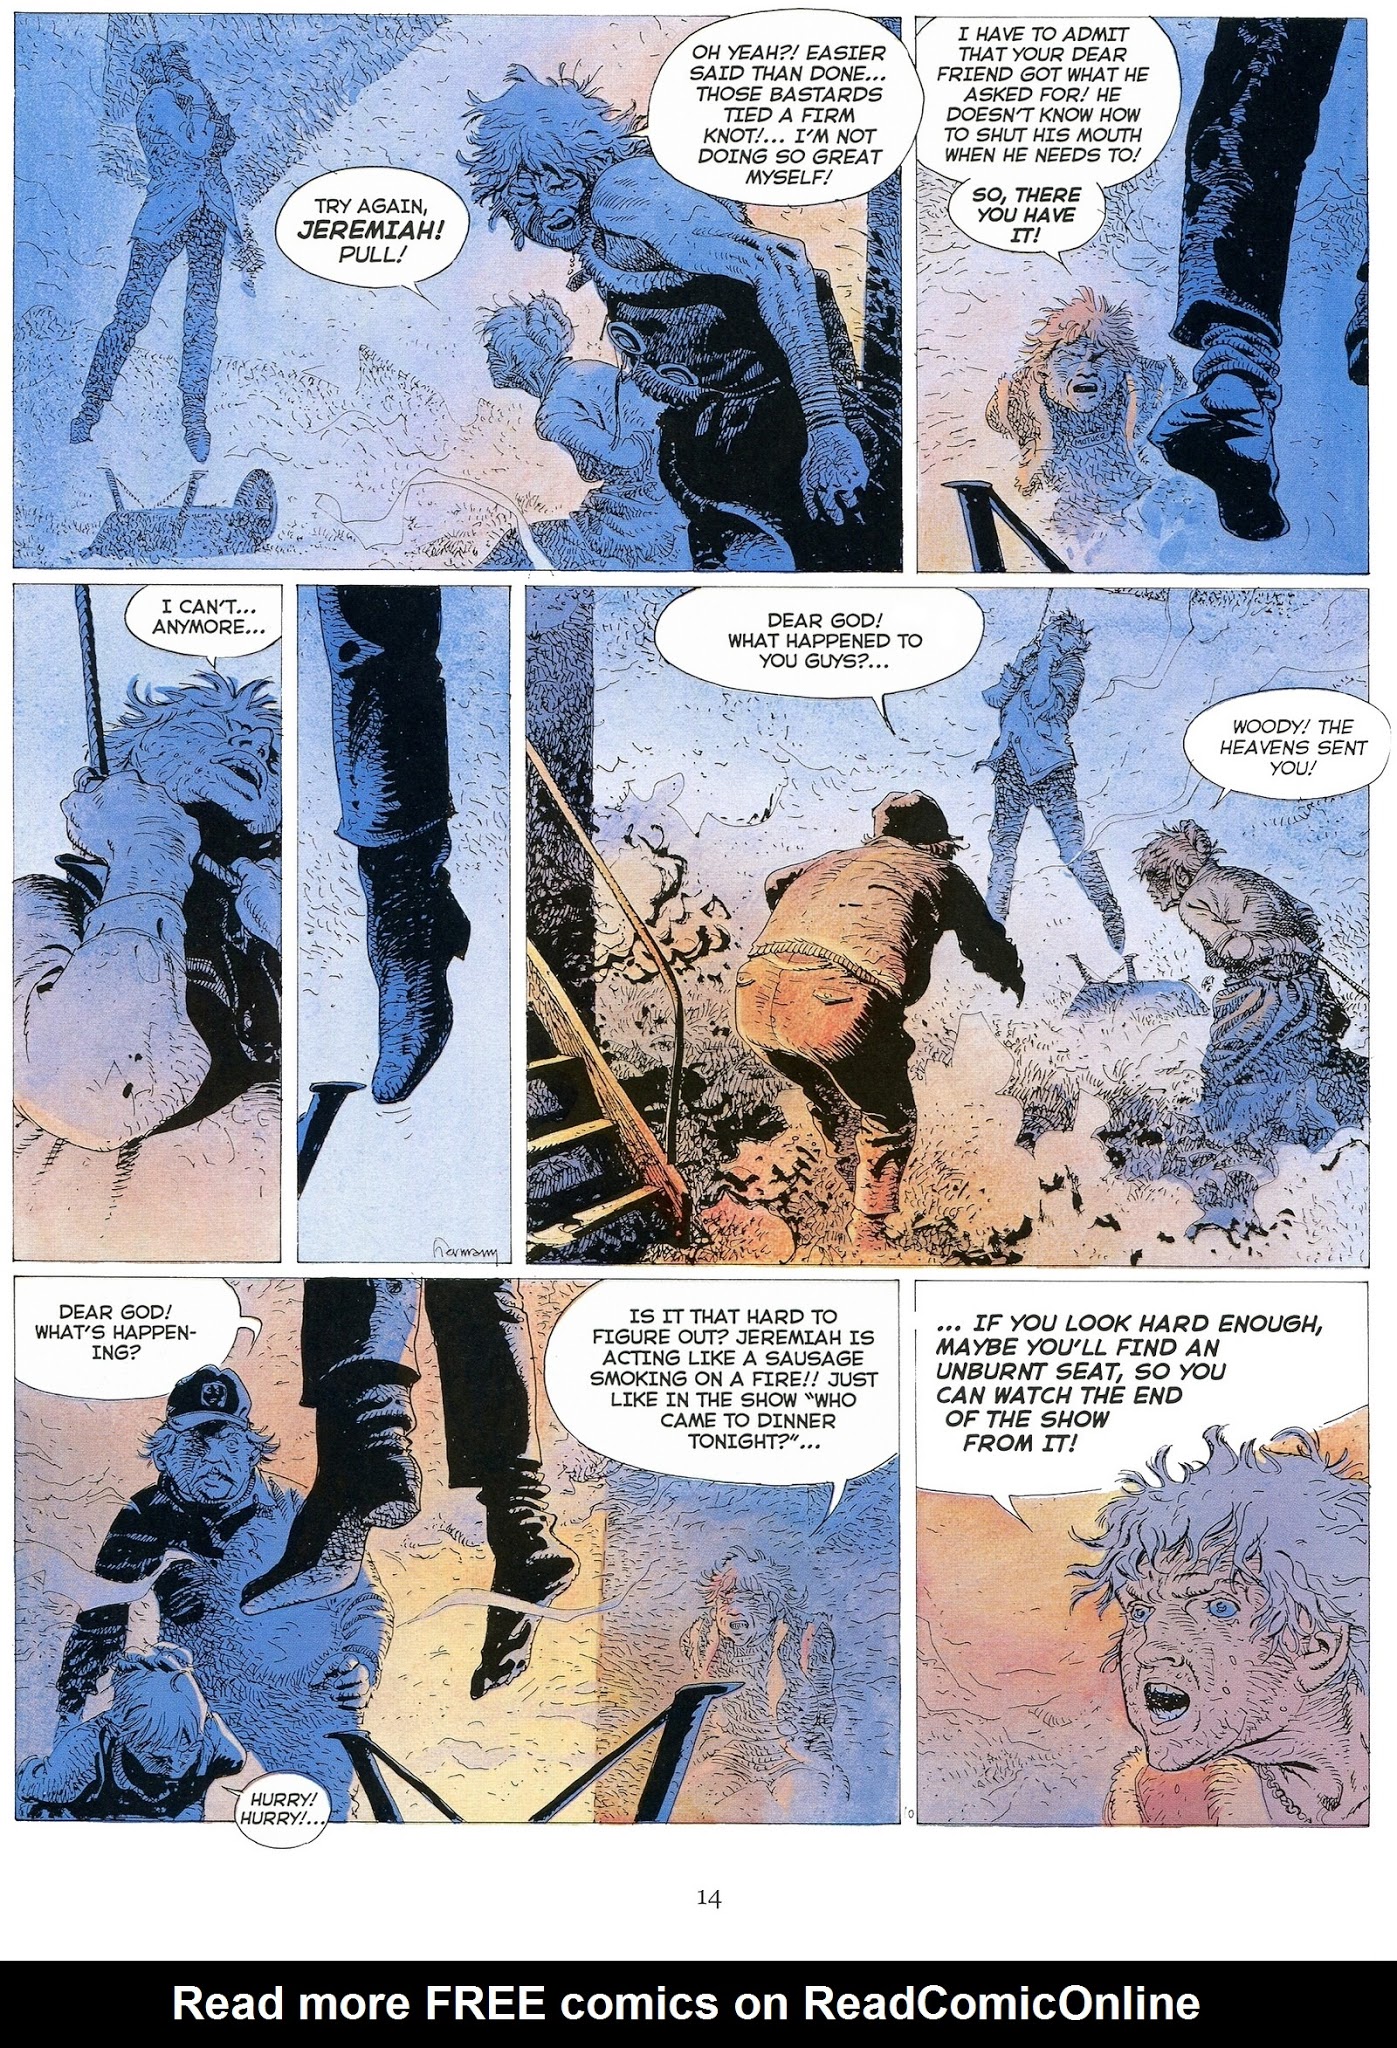 Read online Jeremiah by Hermann comic -  Issue # TPB 3 - 15